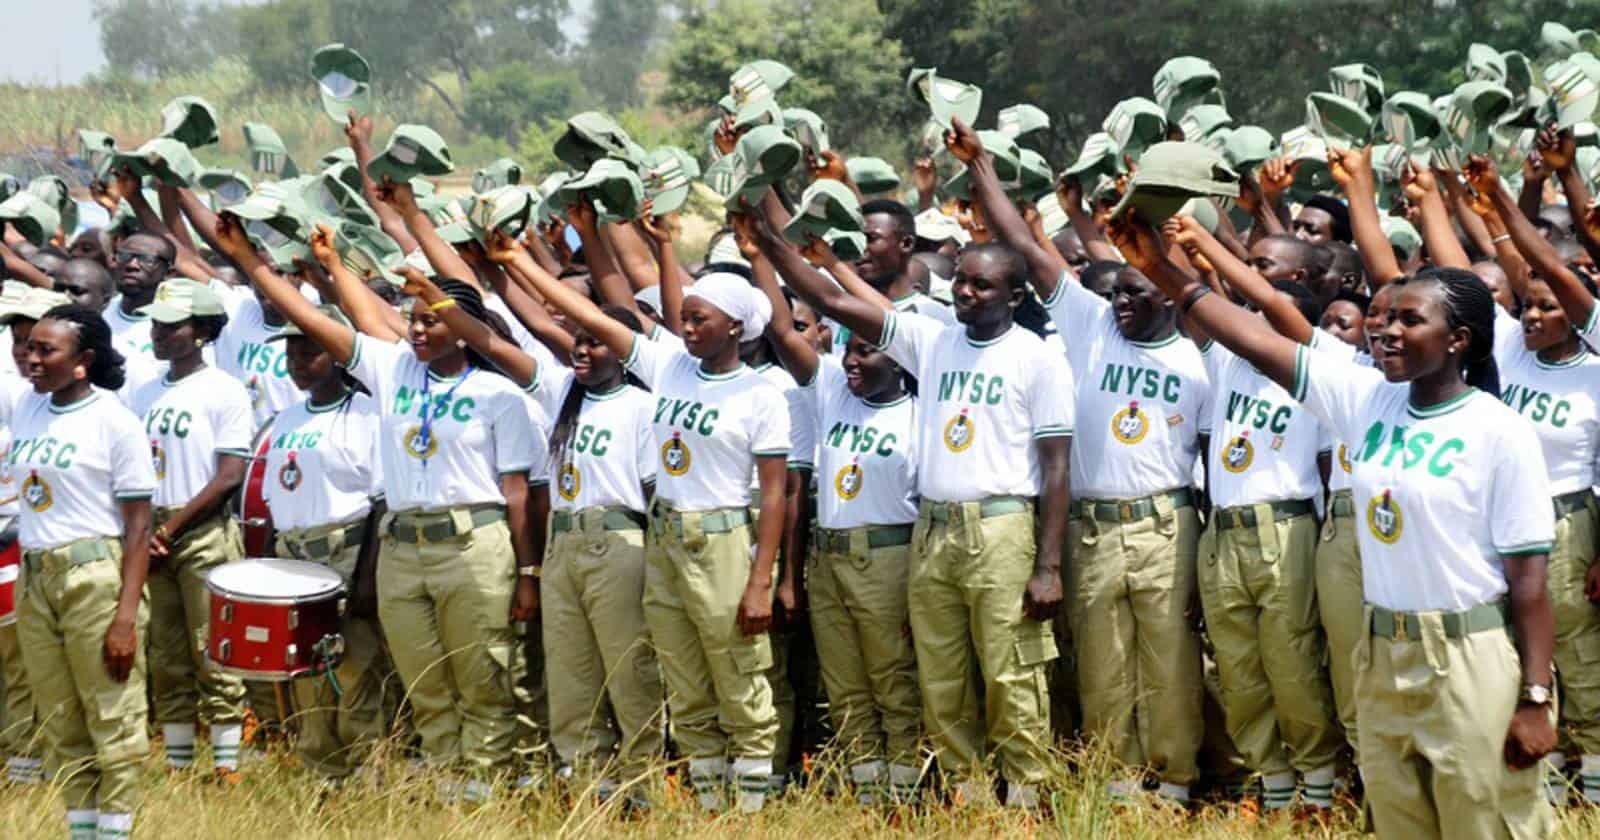 NYSC Physical Verification of Credentials & Travel Documents of Foreign Trained Graduates